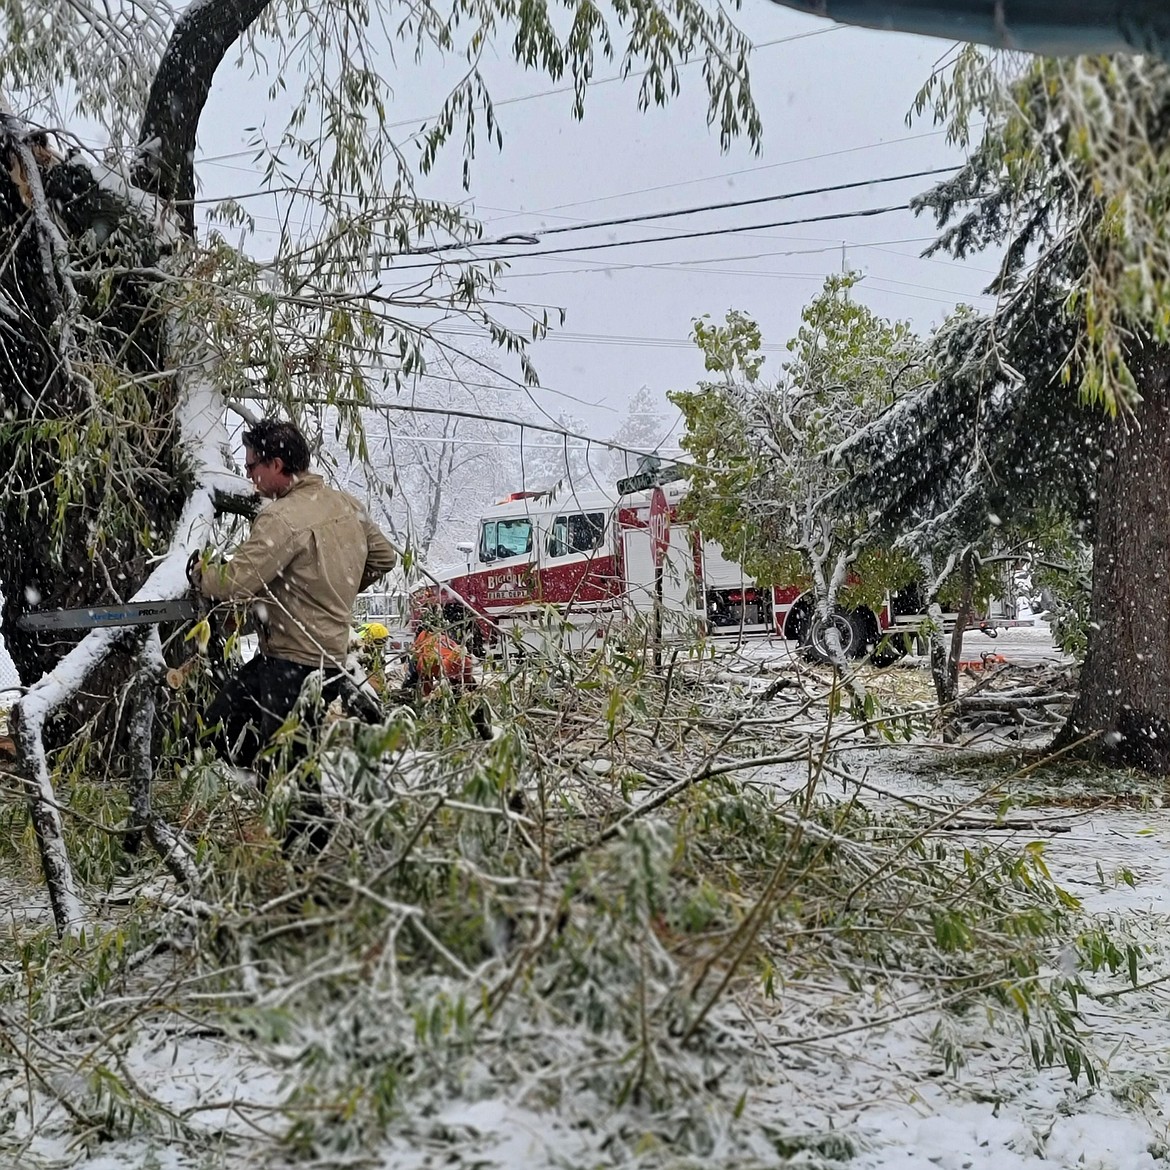 Michael Johnson and Bigfork firefighters work to clear the debris from the fallen tree. (photo provided)